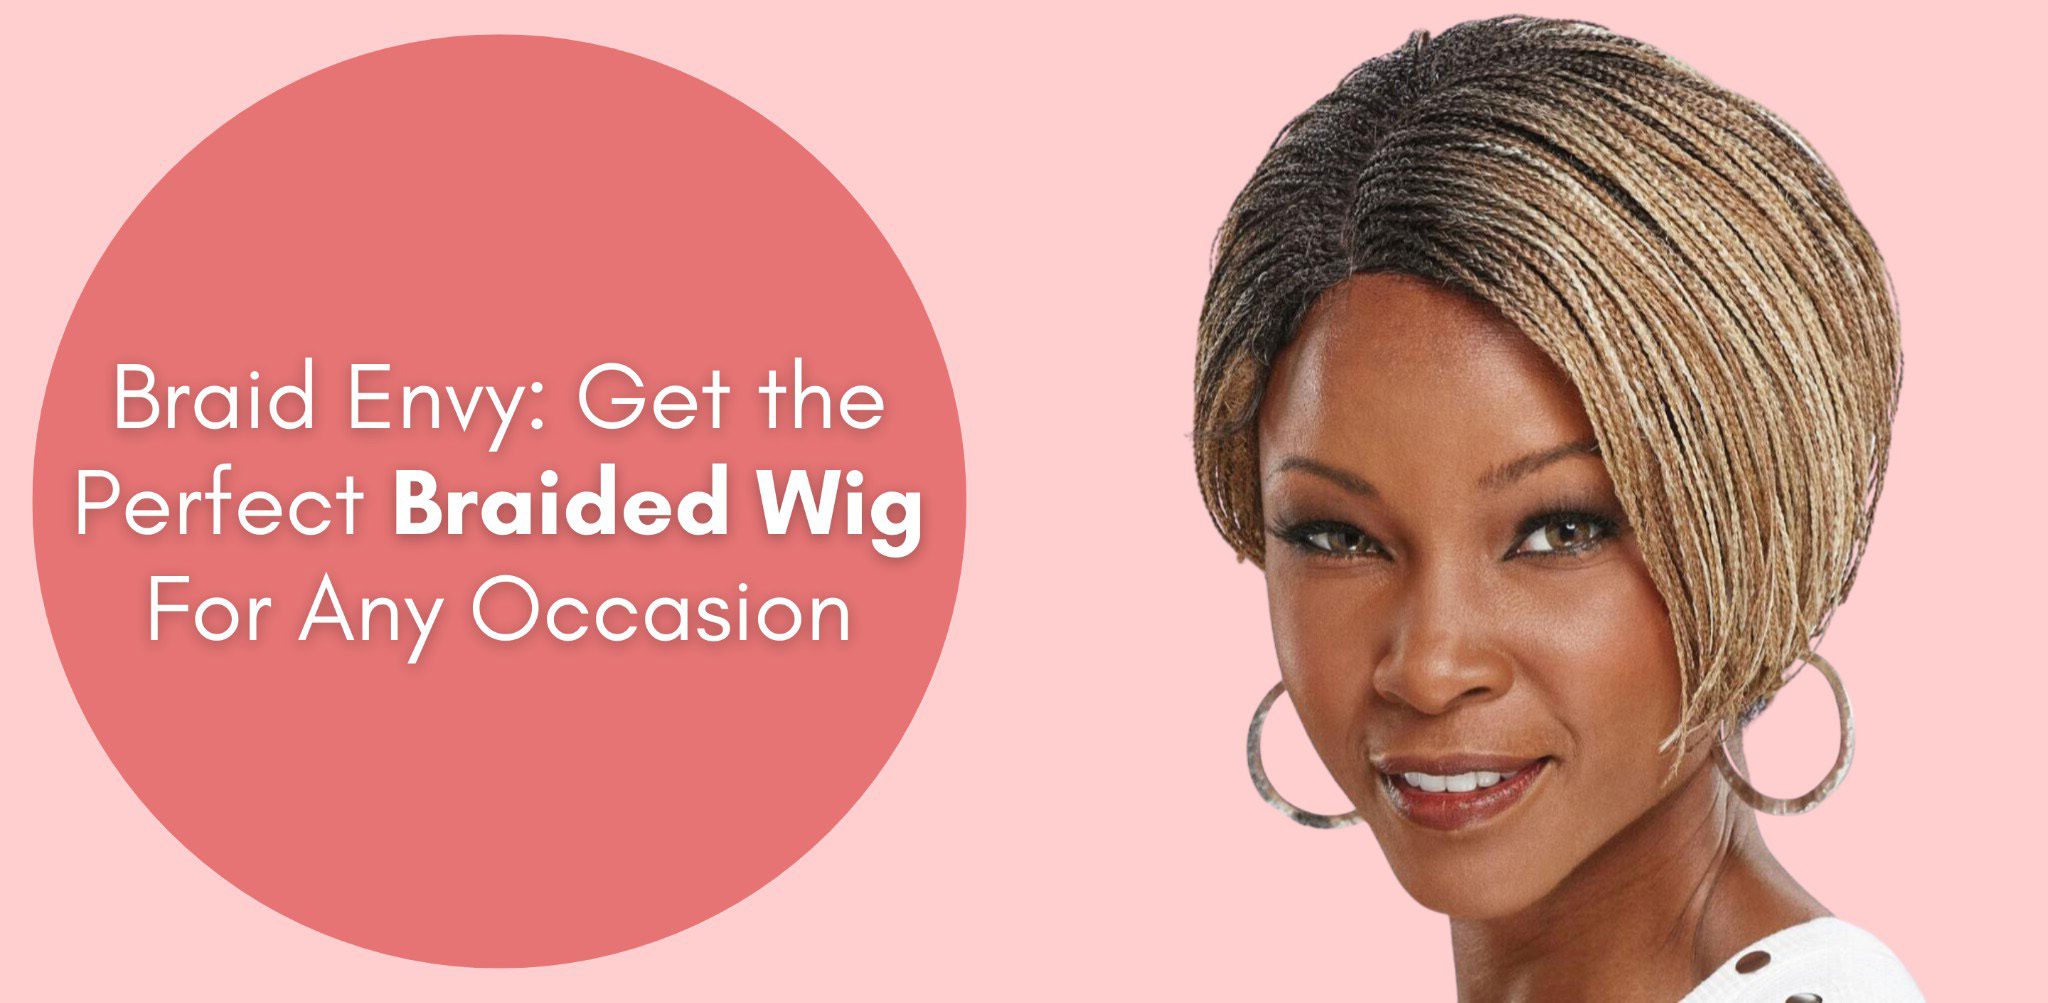 braid envy get the perfect braided wig for any occasion